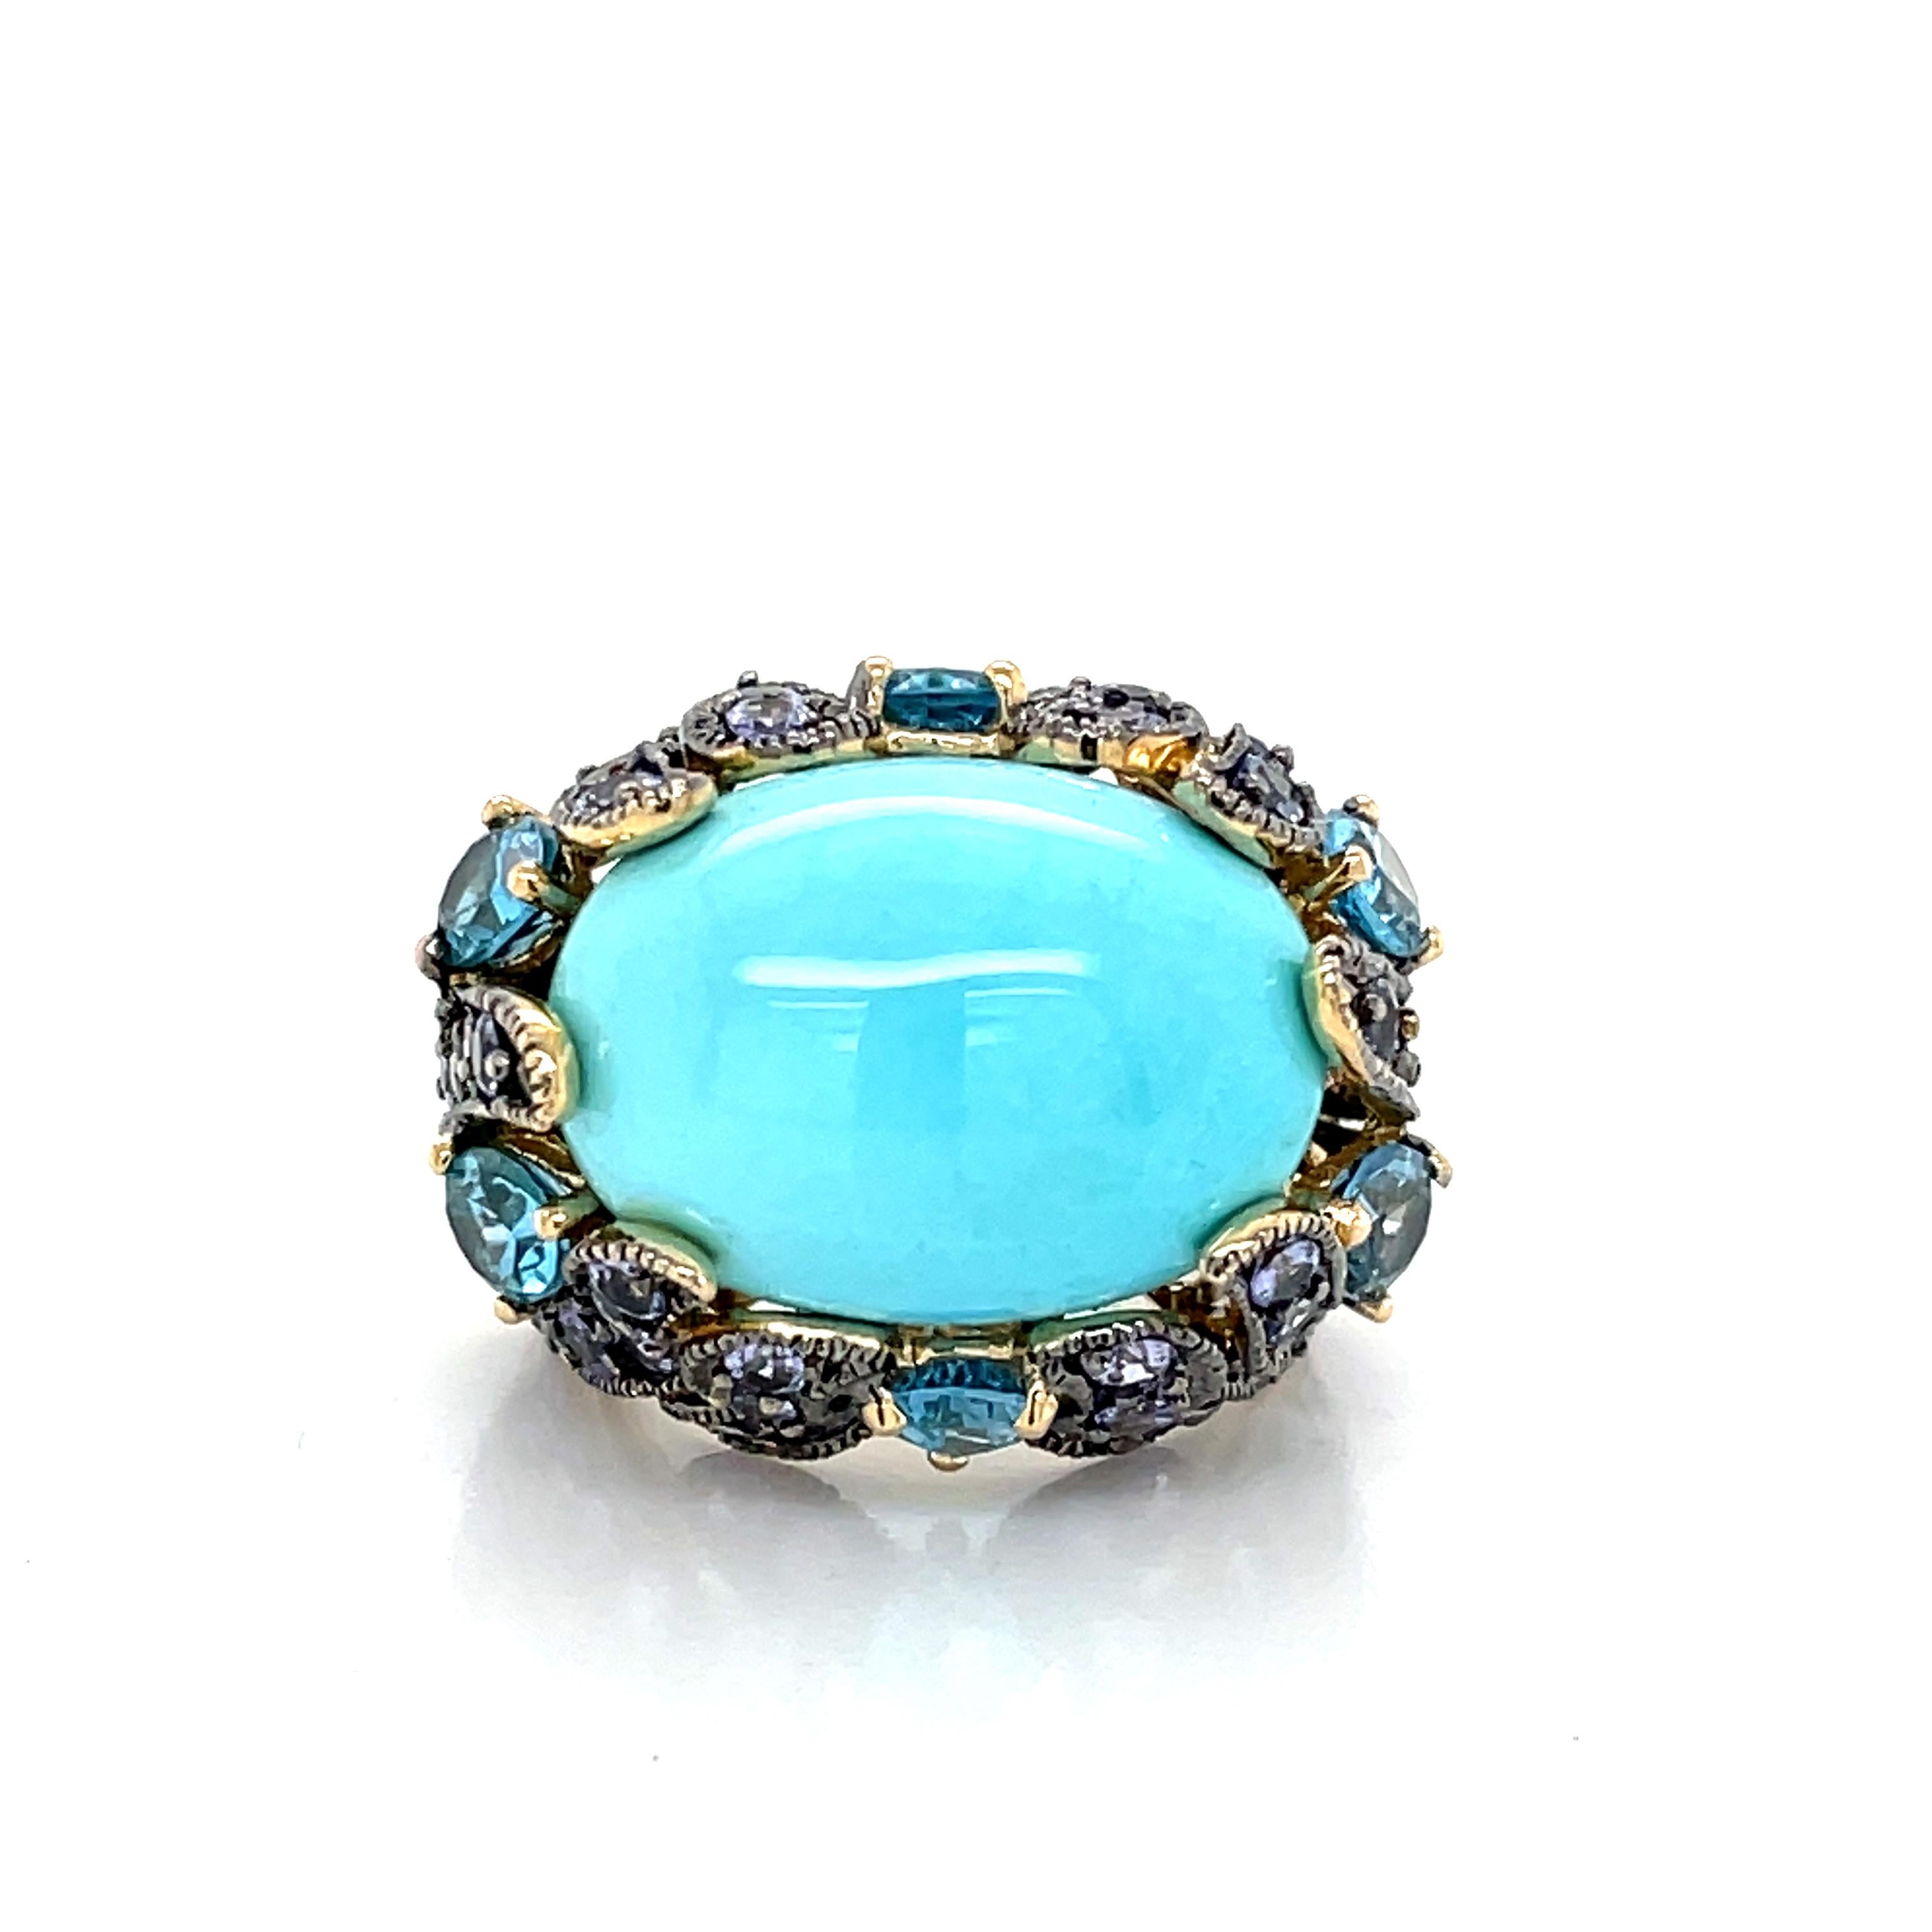 A  stunning 17mm x 13mm robin's egg blue oval turquoise cabochon is engaged in an opulent oxidized gold setting with six .25 carat pear shaped facet cut vibrant blue topaz stones and multiple brilliant round faceted violet color tanzanite giving